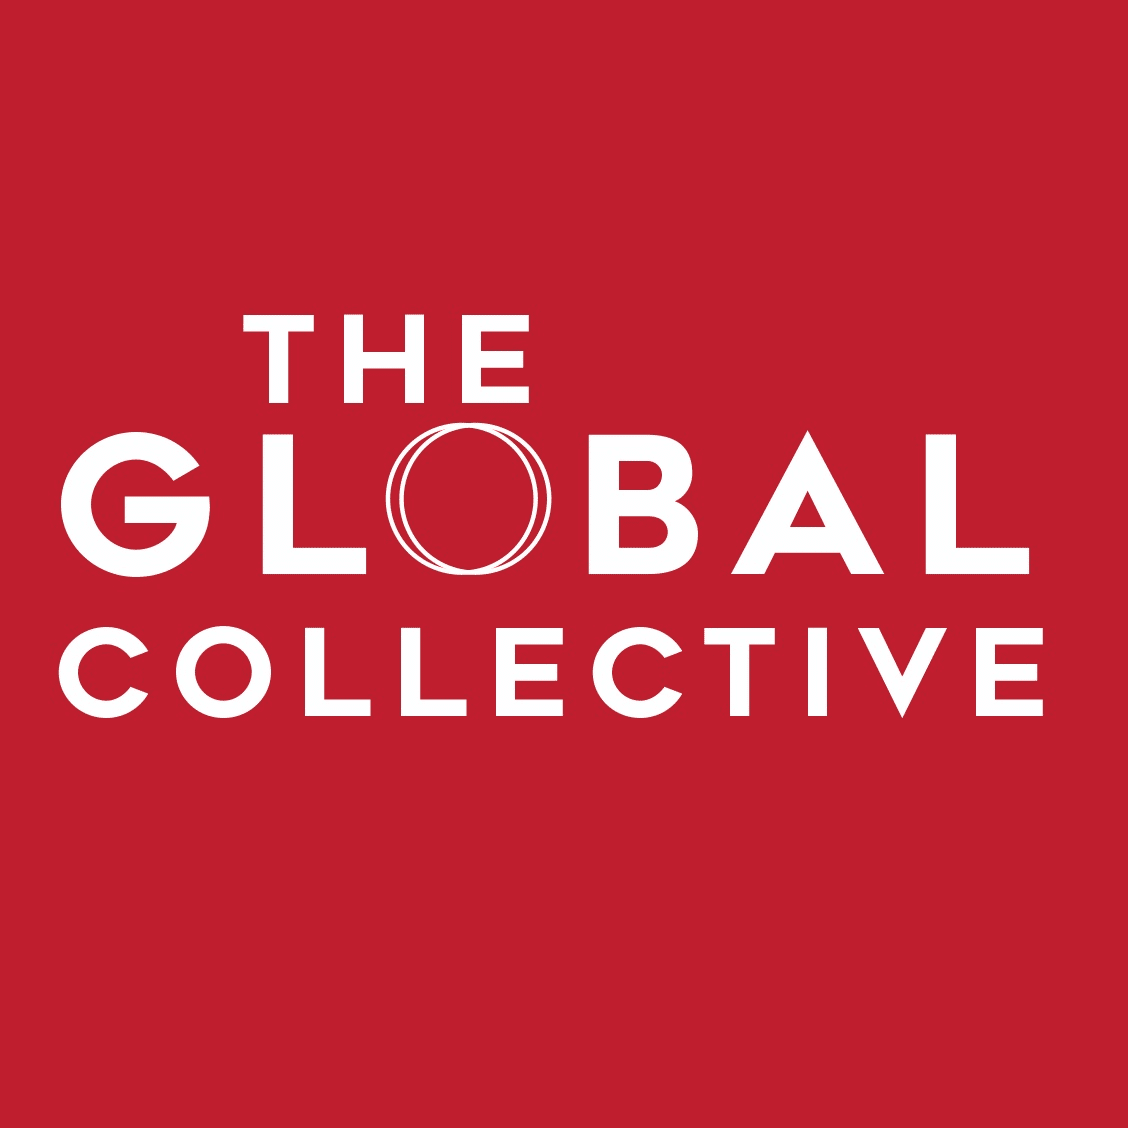 The Global Collective